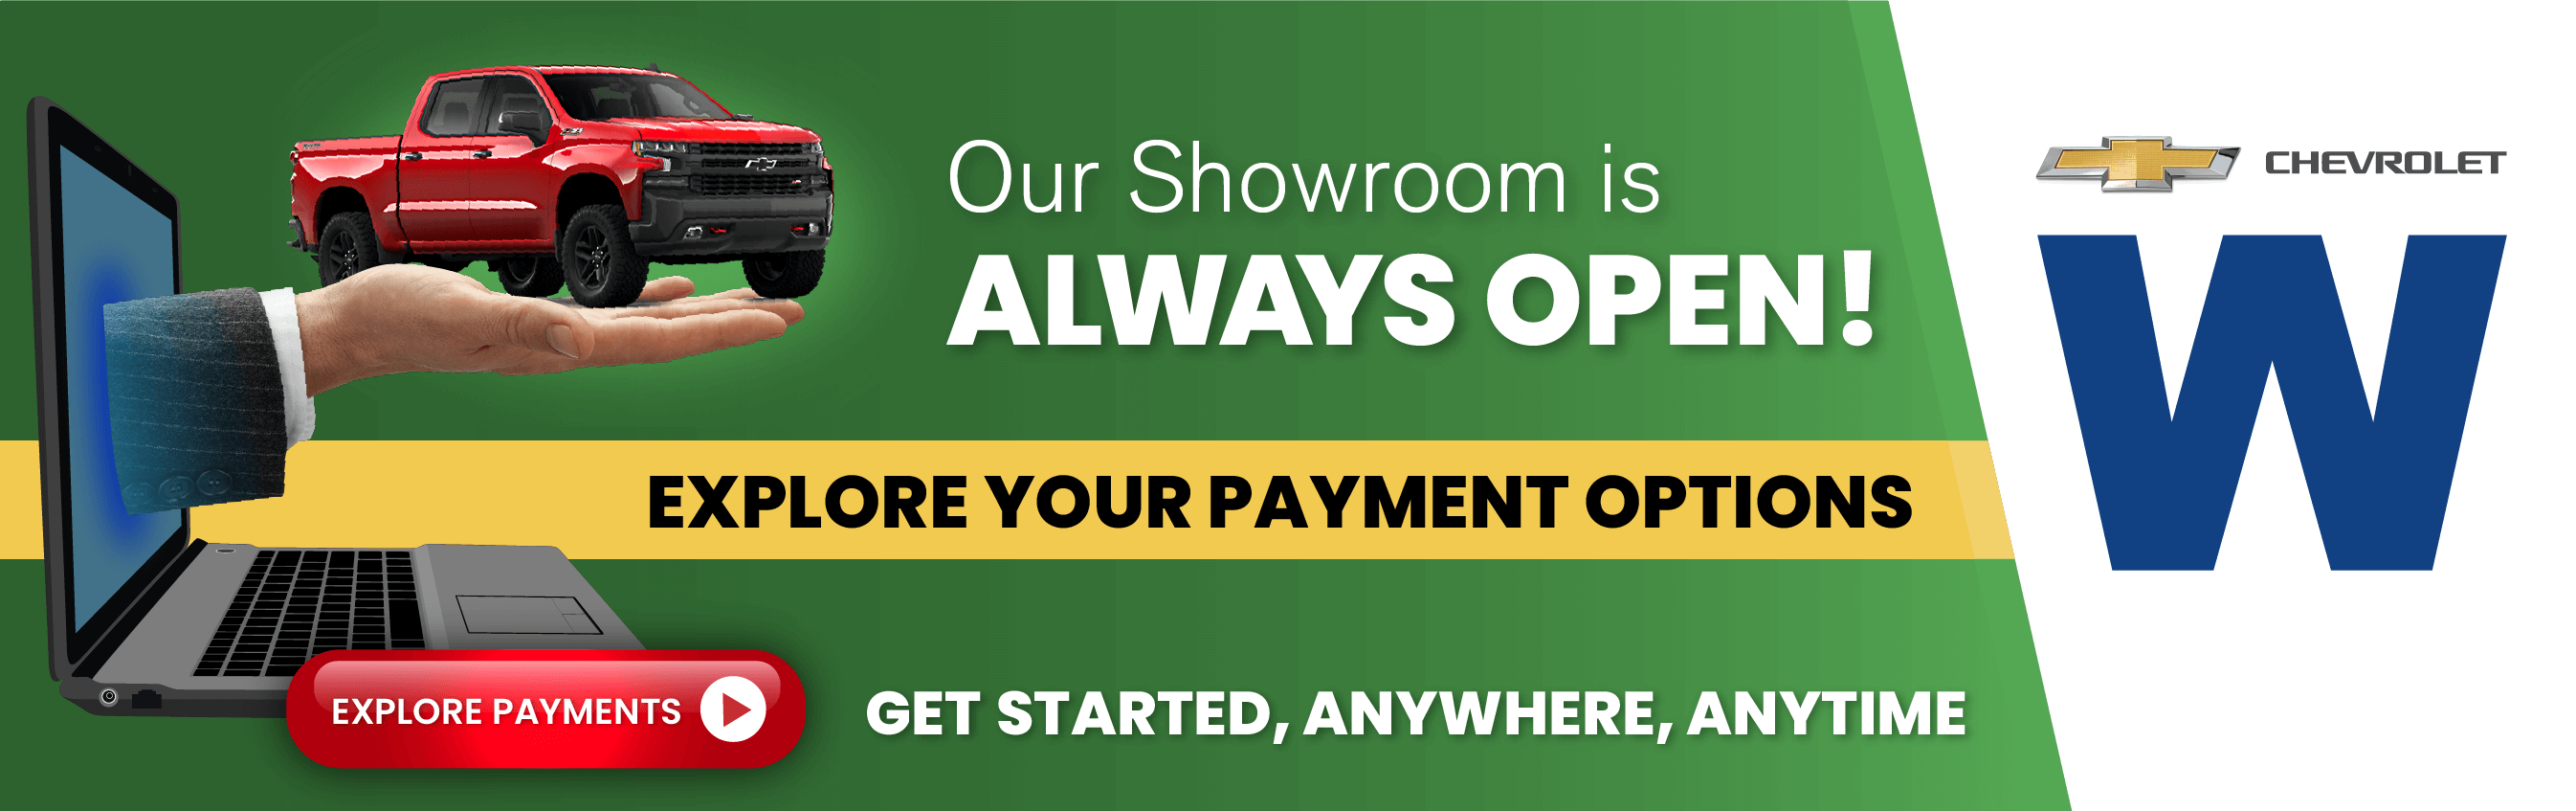 Explore Your Payment Options